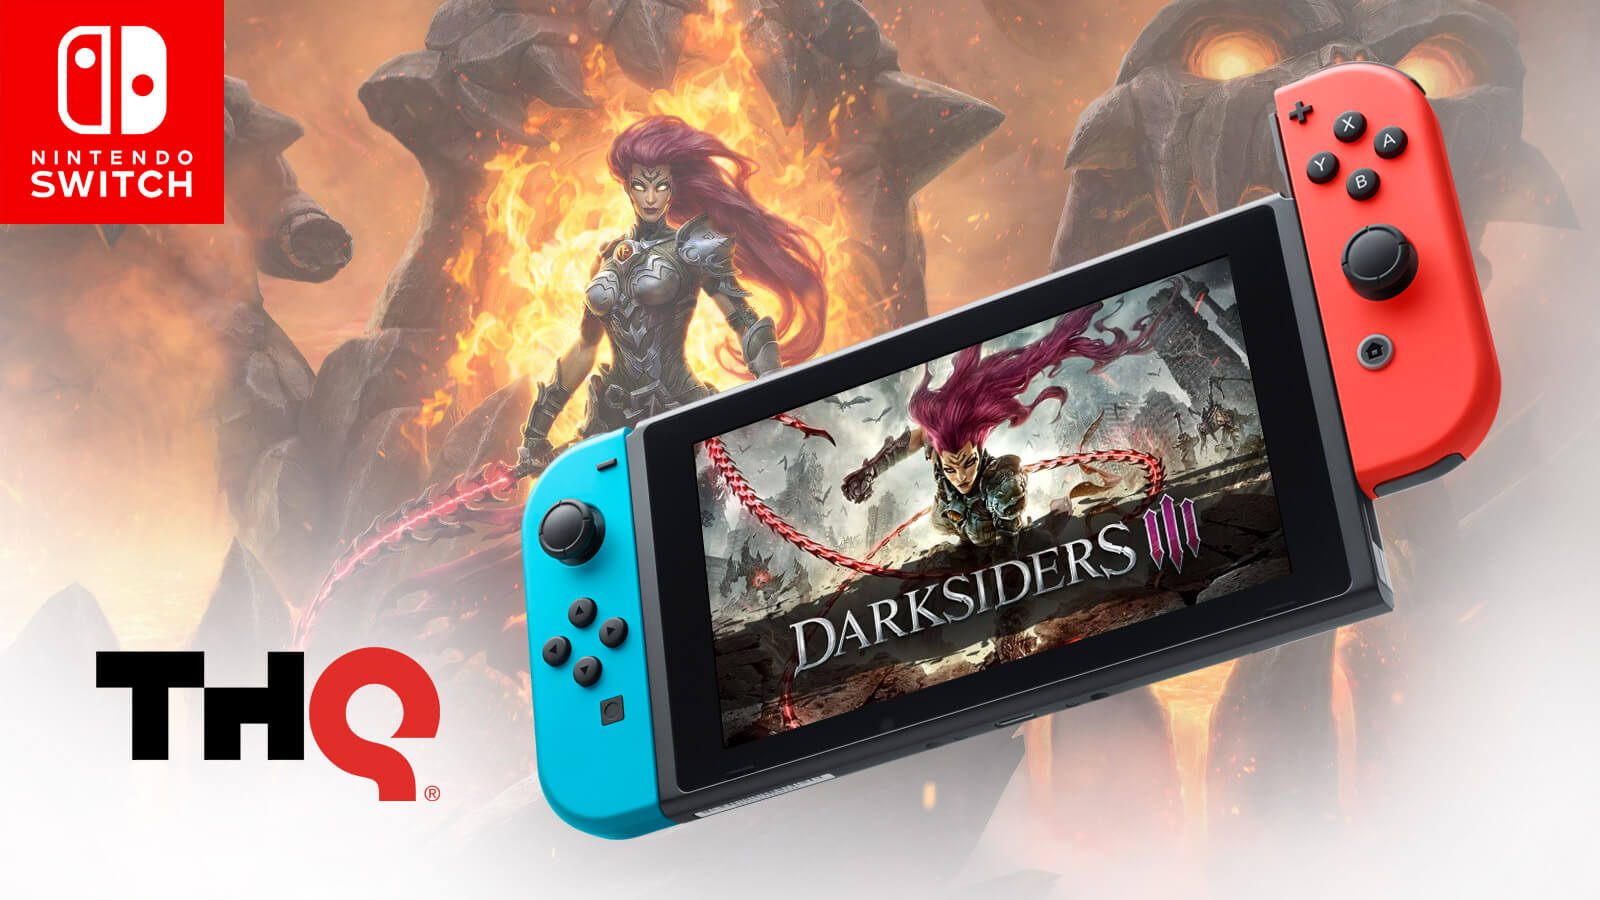 Darksiders 3 Coming To Nintendo Switch